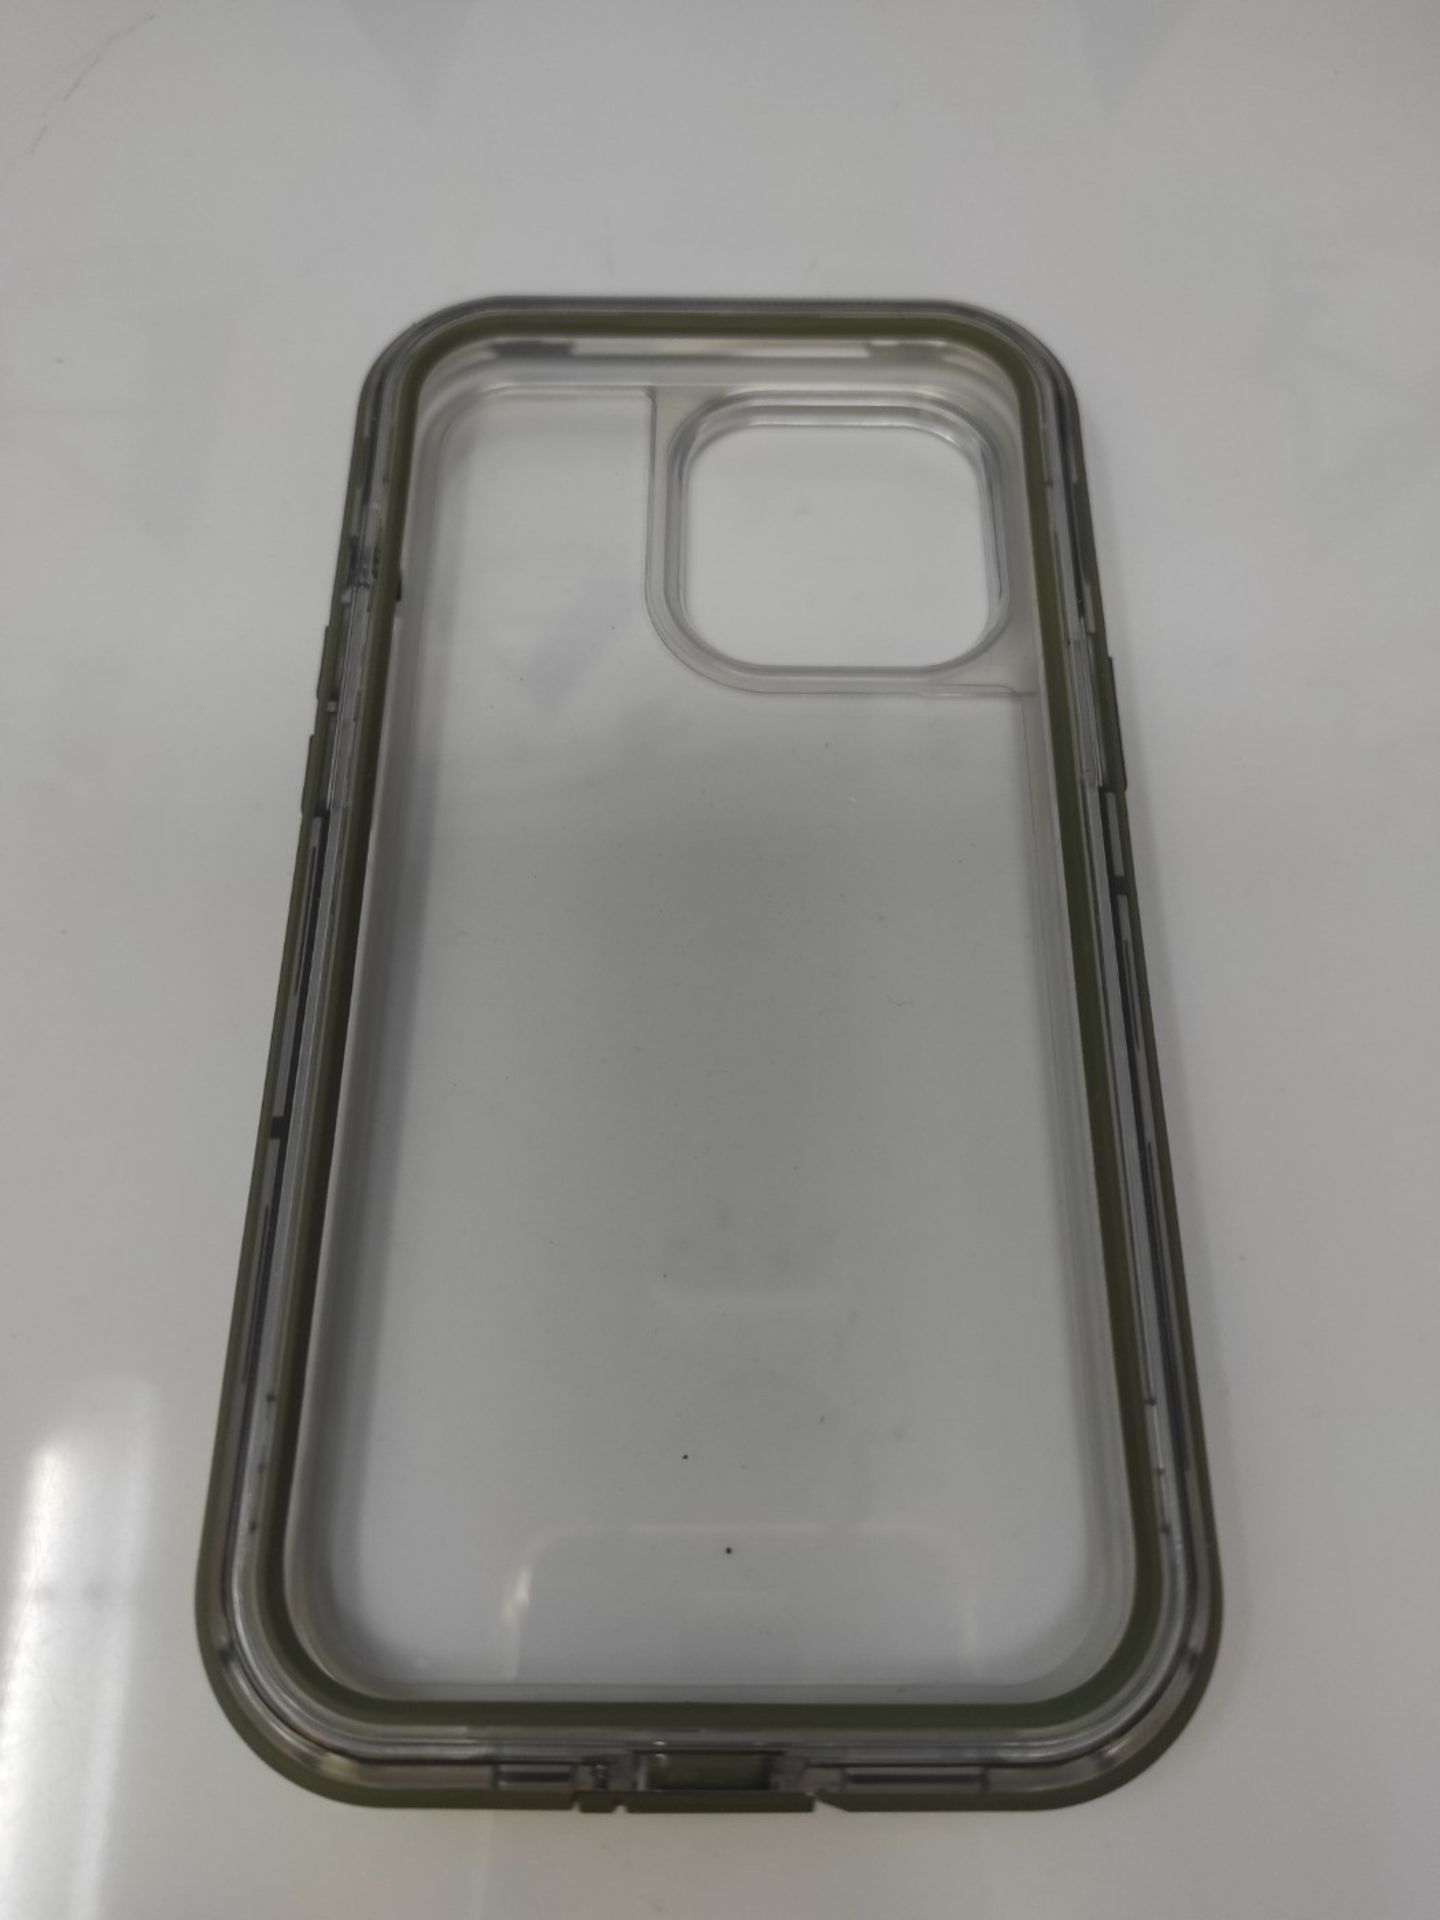 LifeProof for Apple iPhone 13 Pro, drop-proof, dirt-resistant, and snow-proof protecti - Image 3 of 3